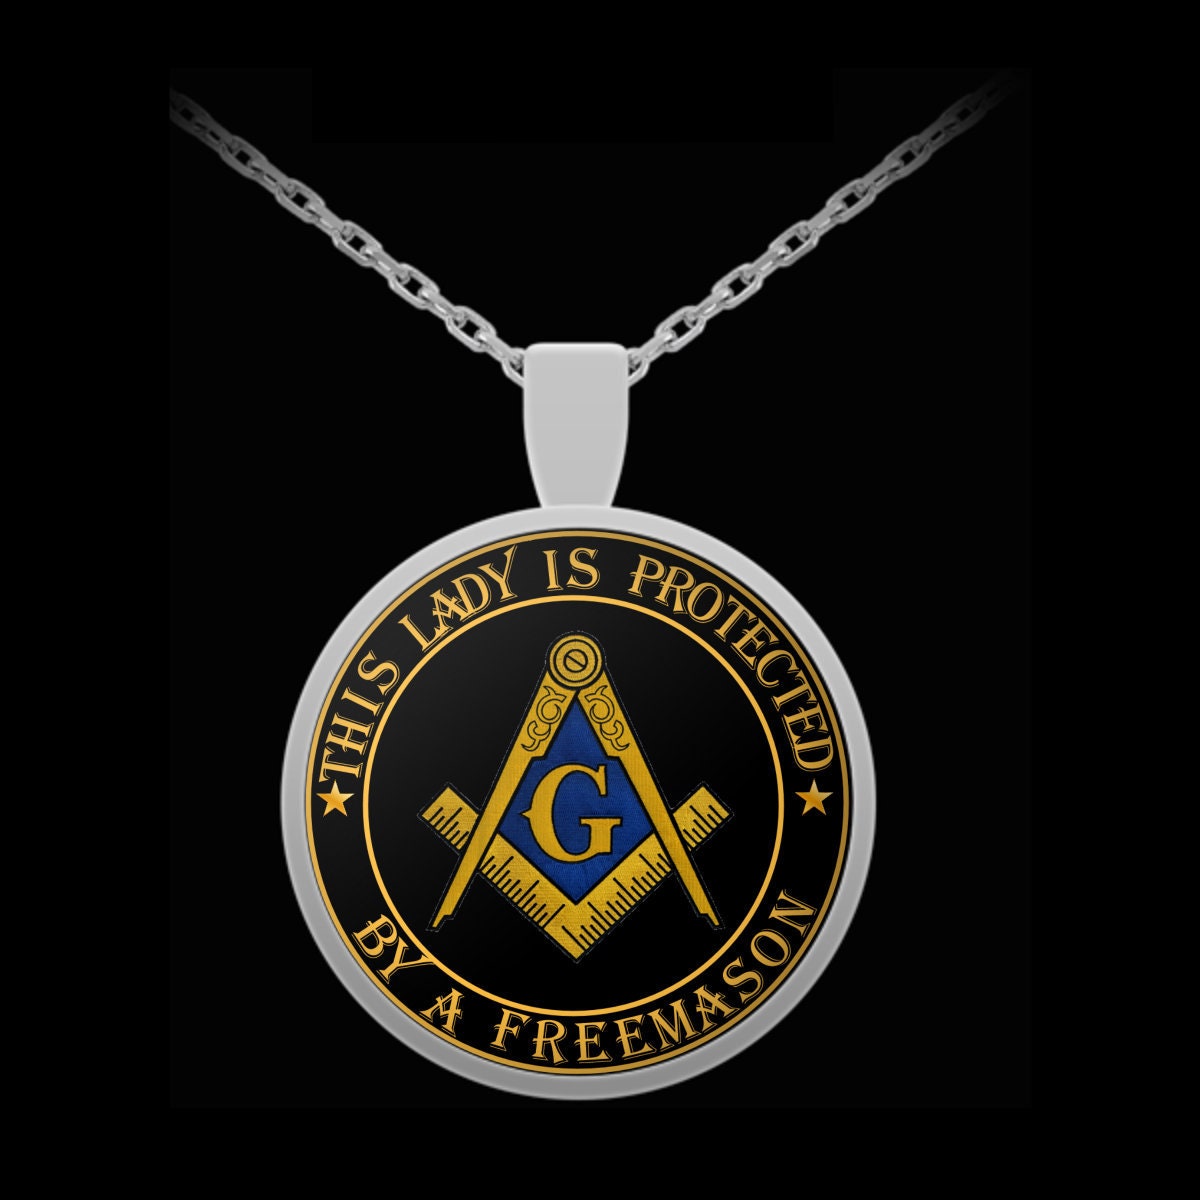 Masonic necklace This Lady is protected by a Freemason | Etsy